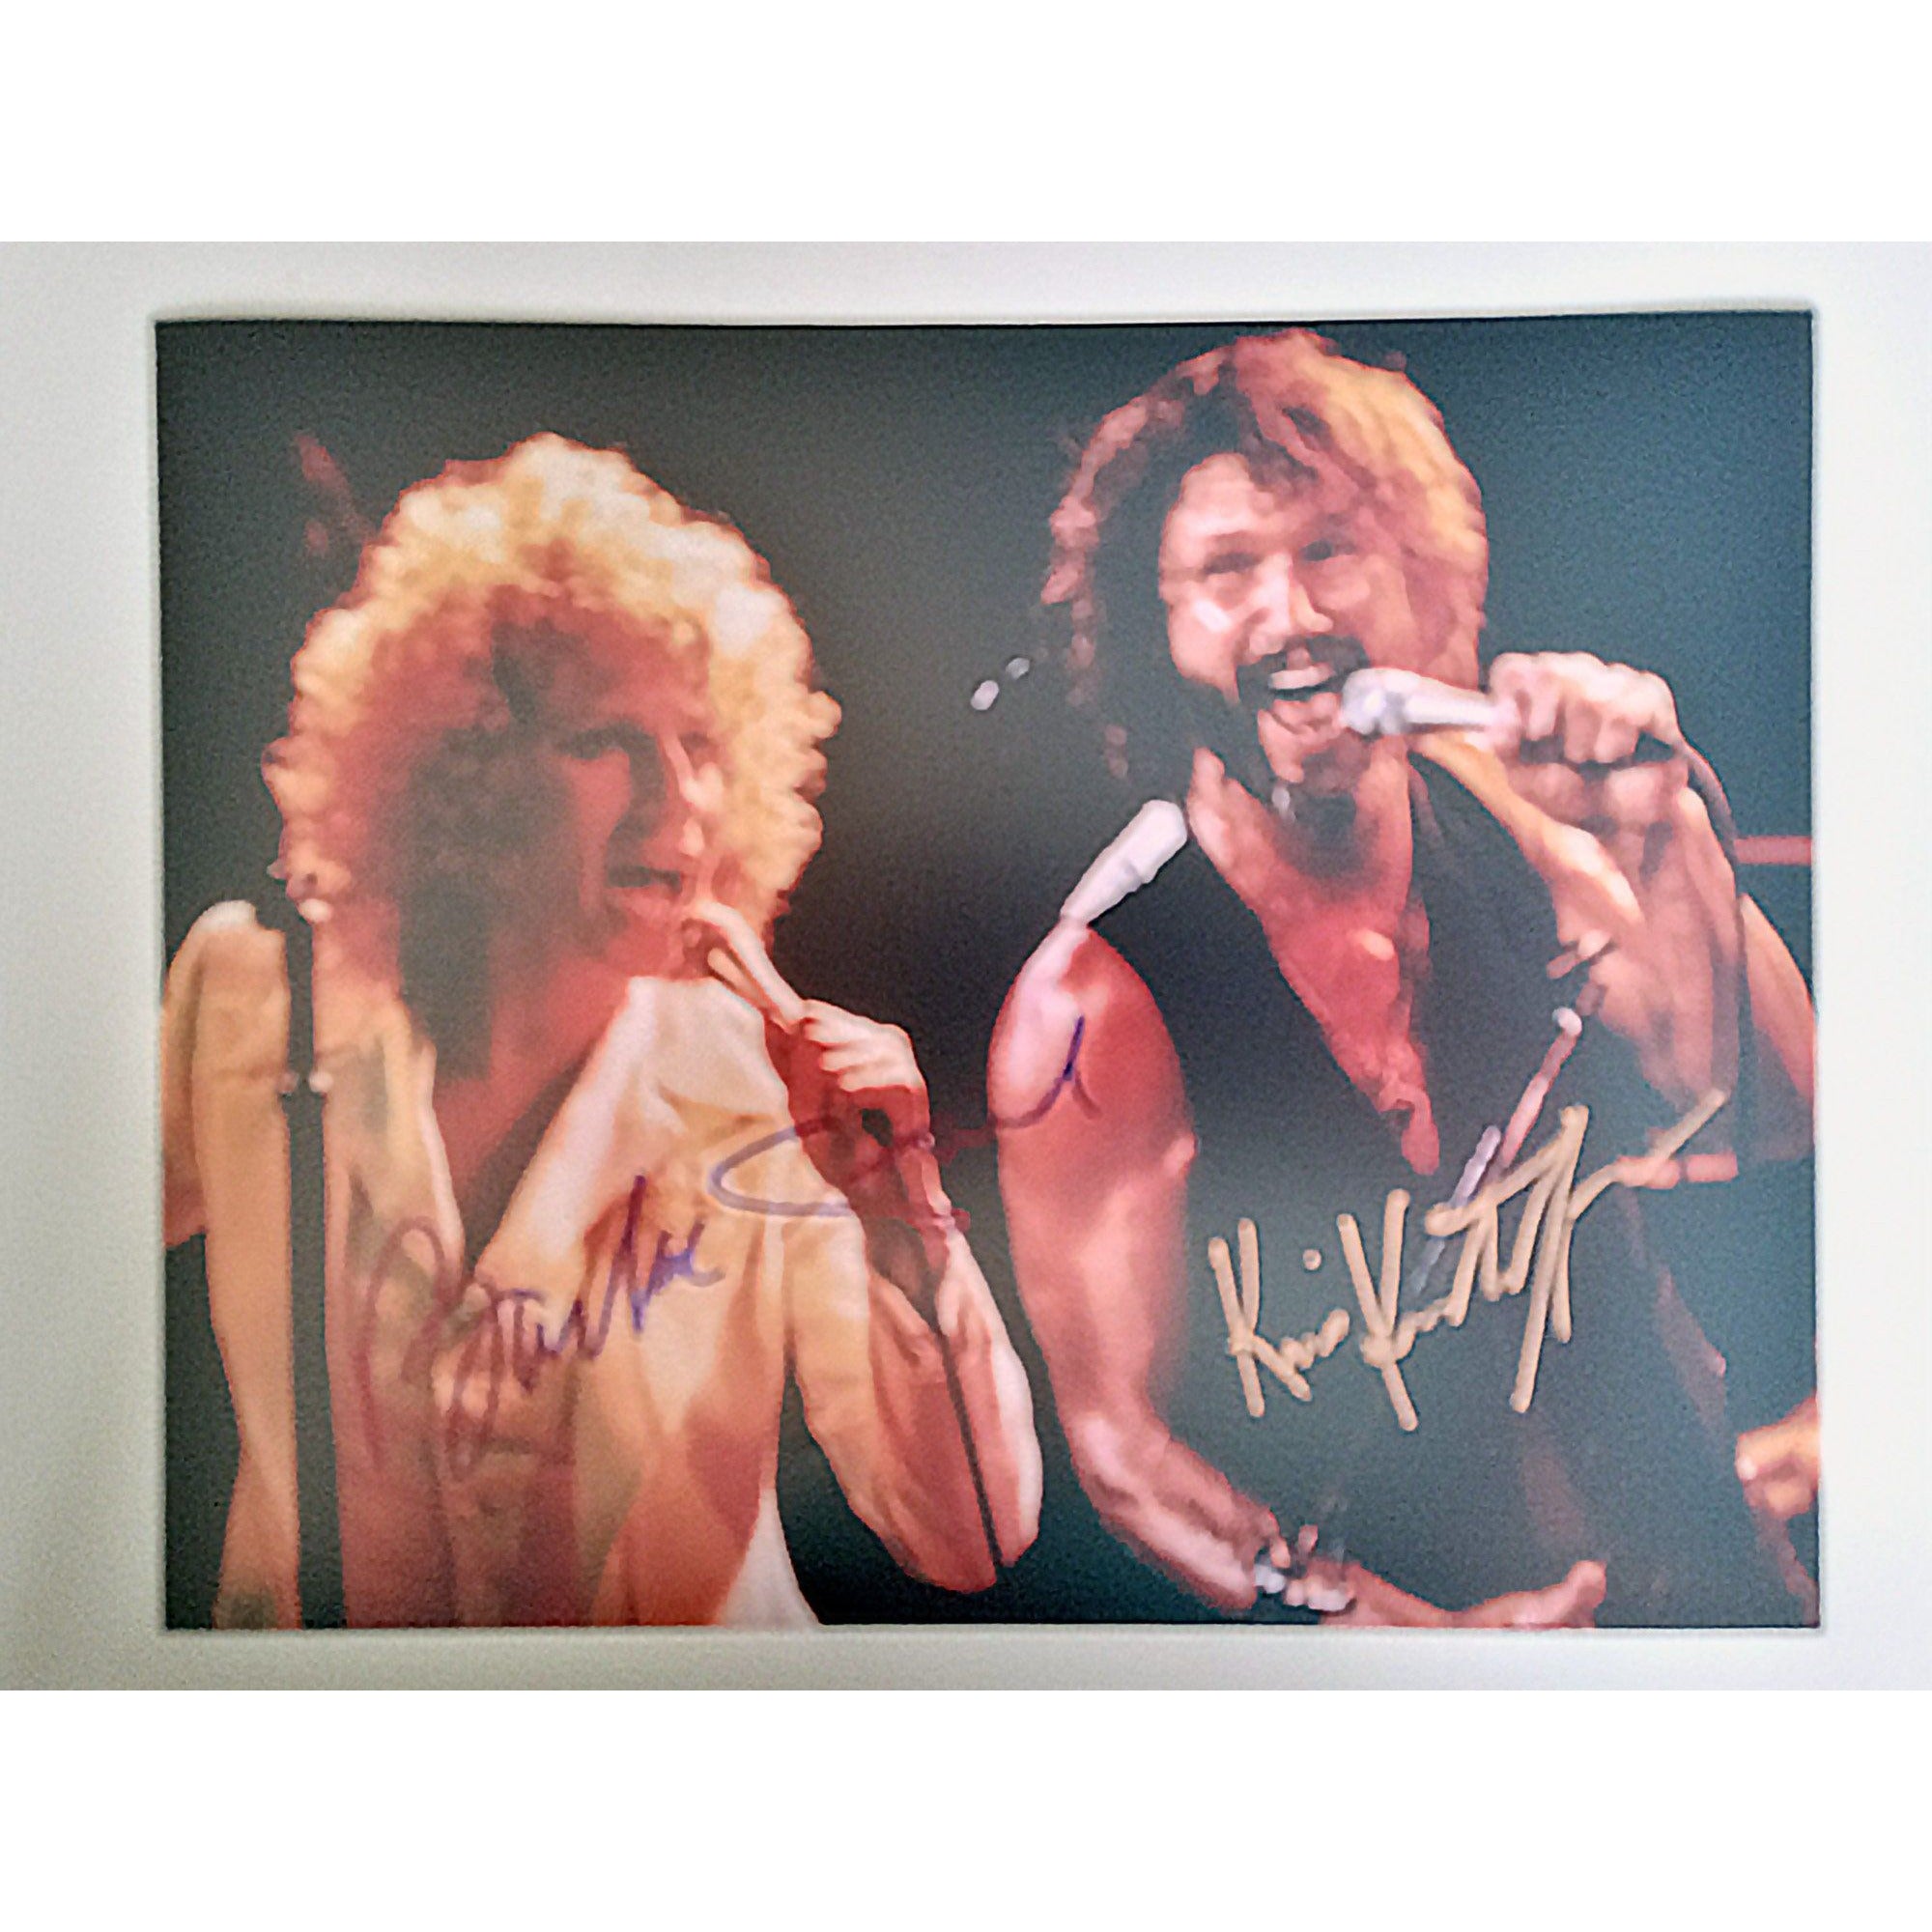 Kris Kristofferson and Barbra Streisand, A Star is Born 8 by 10 signed photo with proof